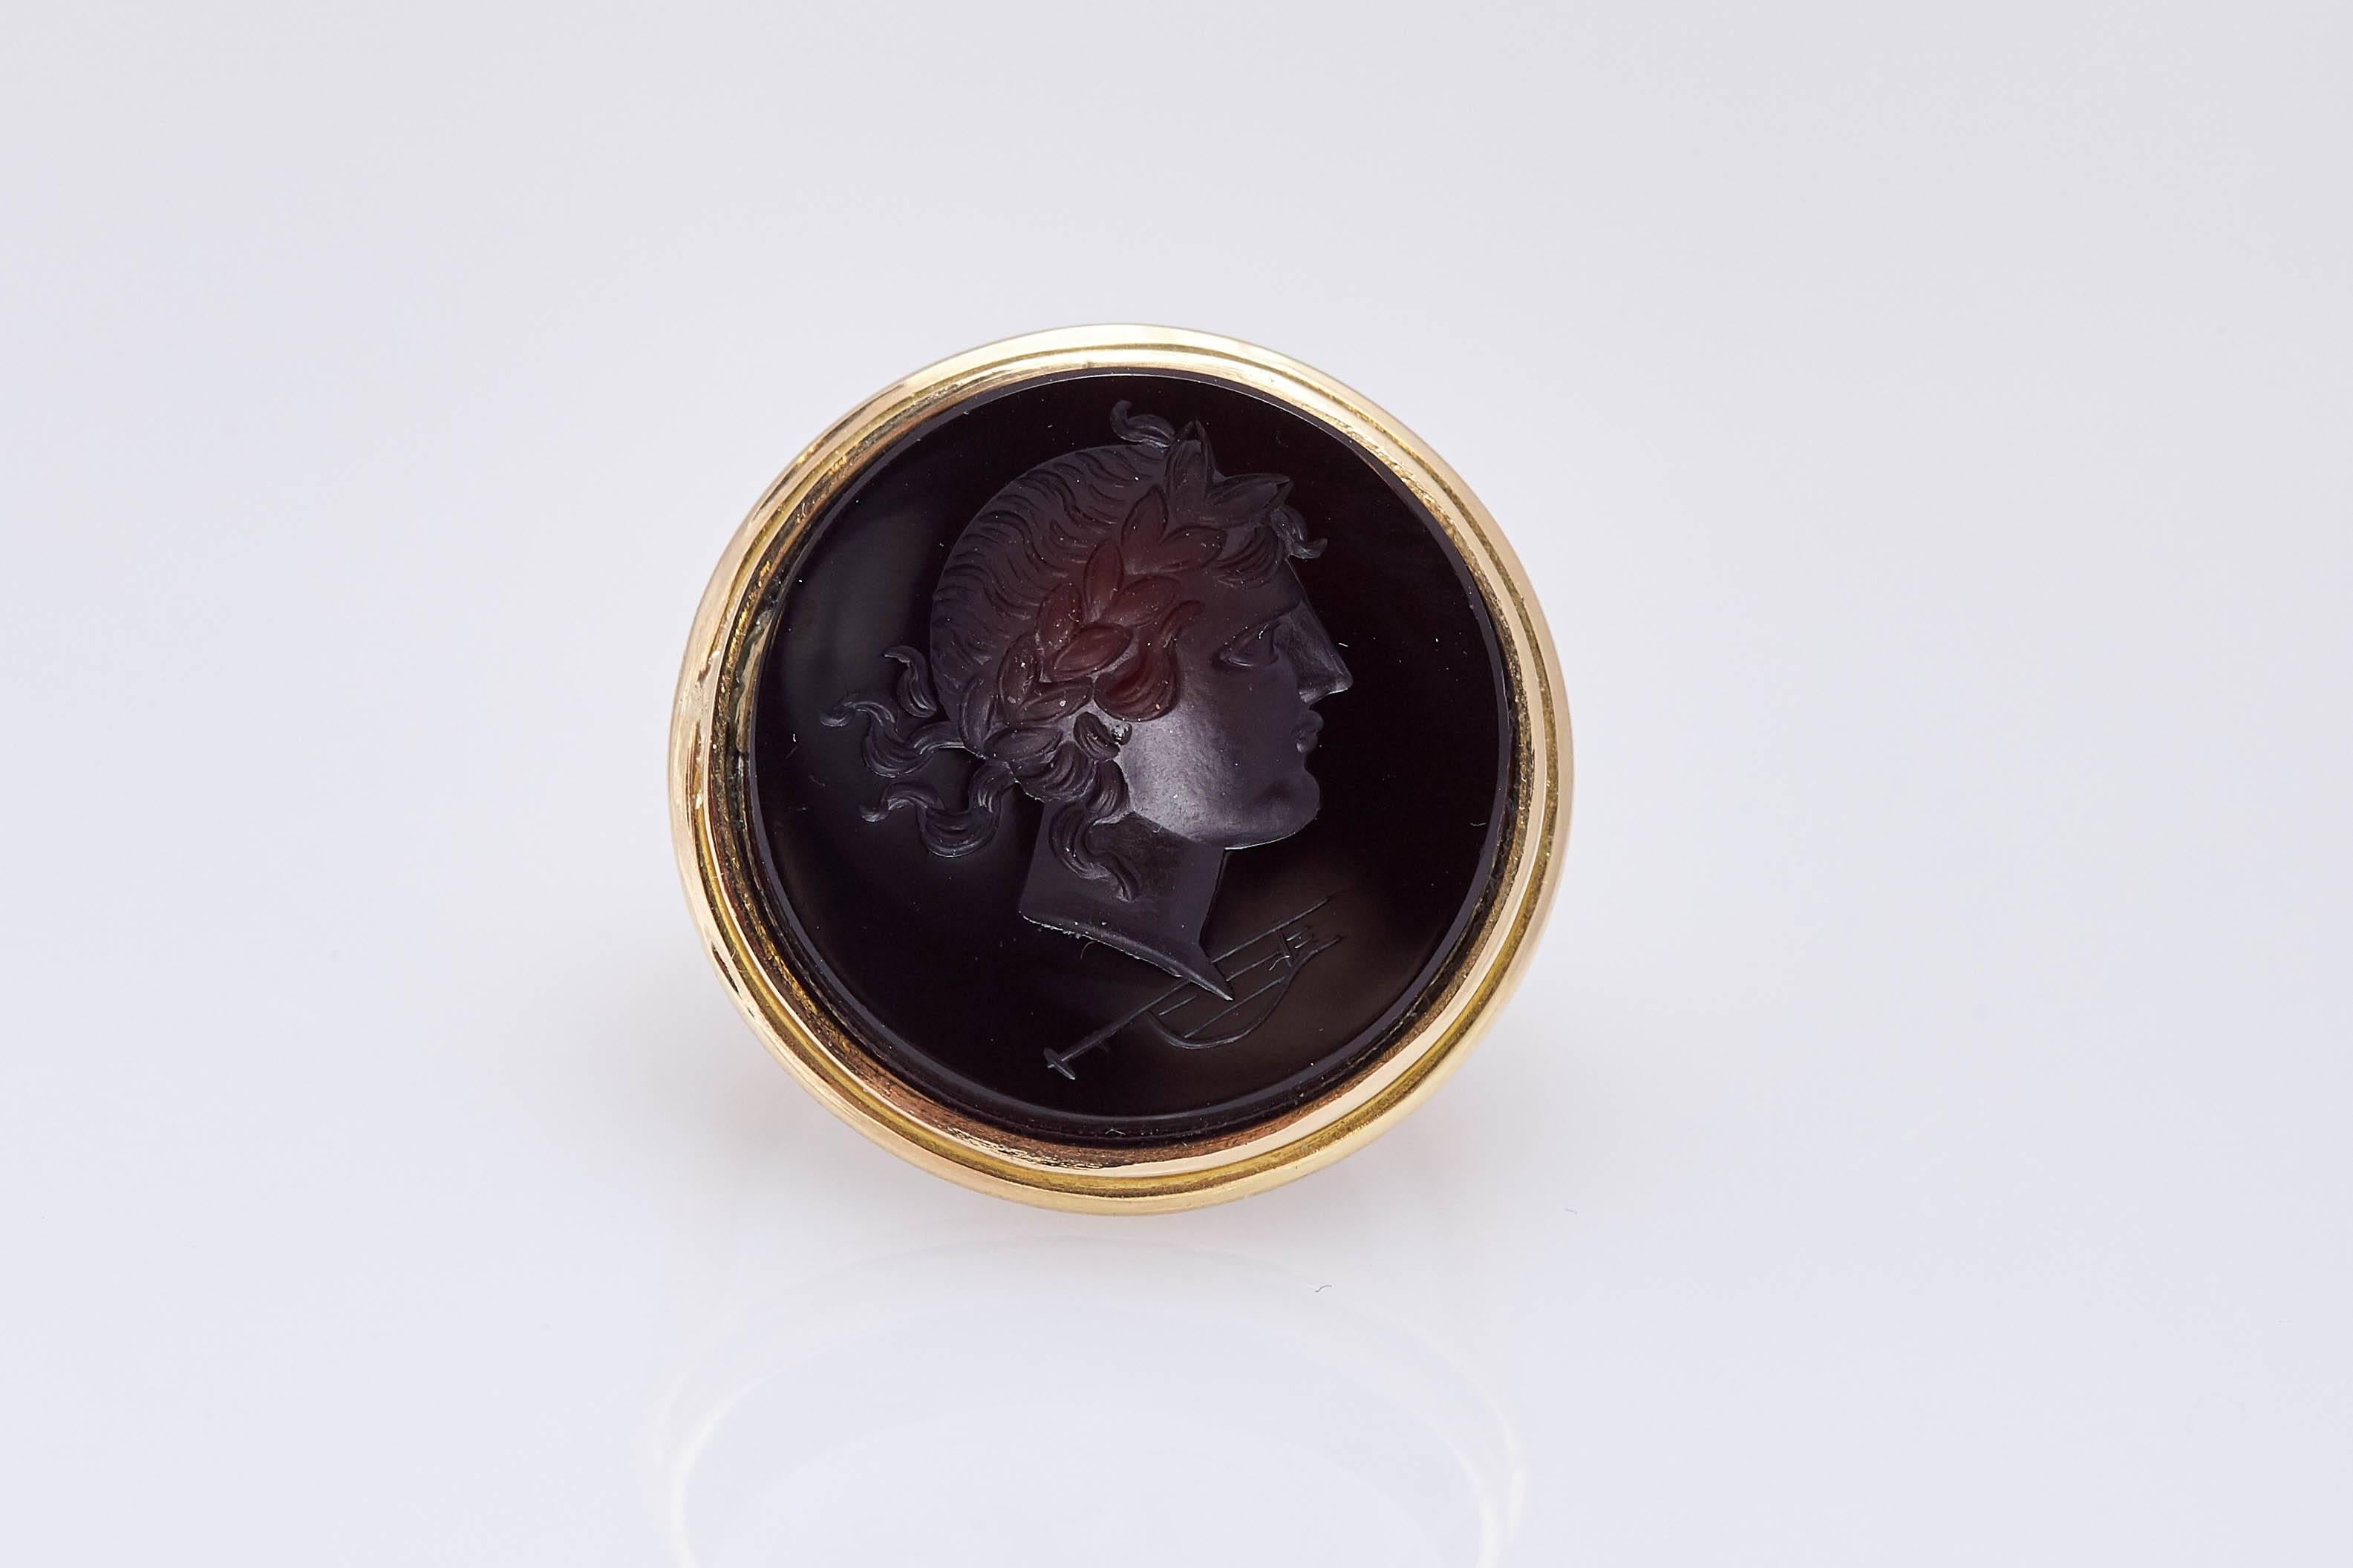 An onyx cameo representing a female figure and musical instrument mounted on a fine 18kt yellow gold mounting. Made in Italy, circa 1950. 